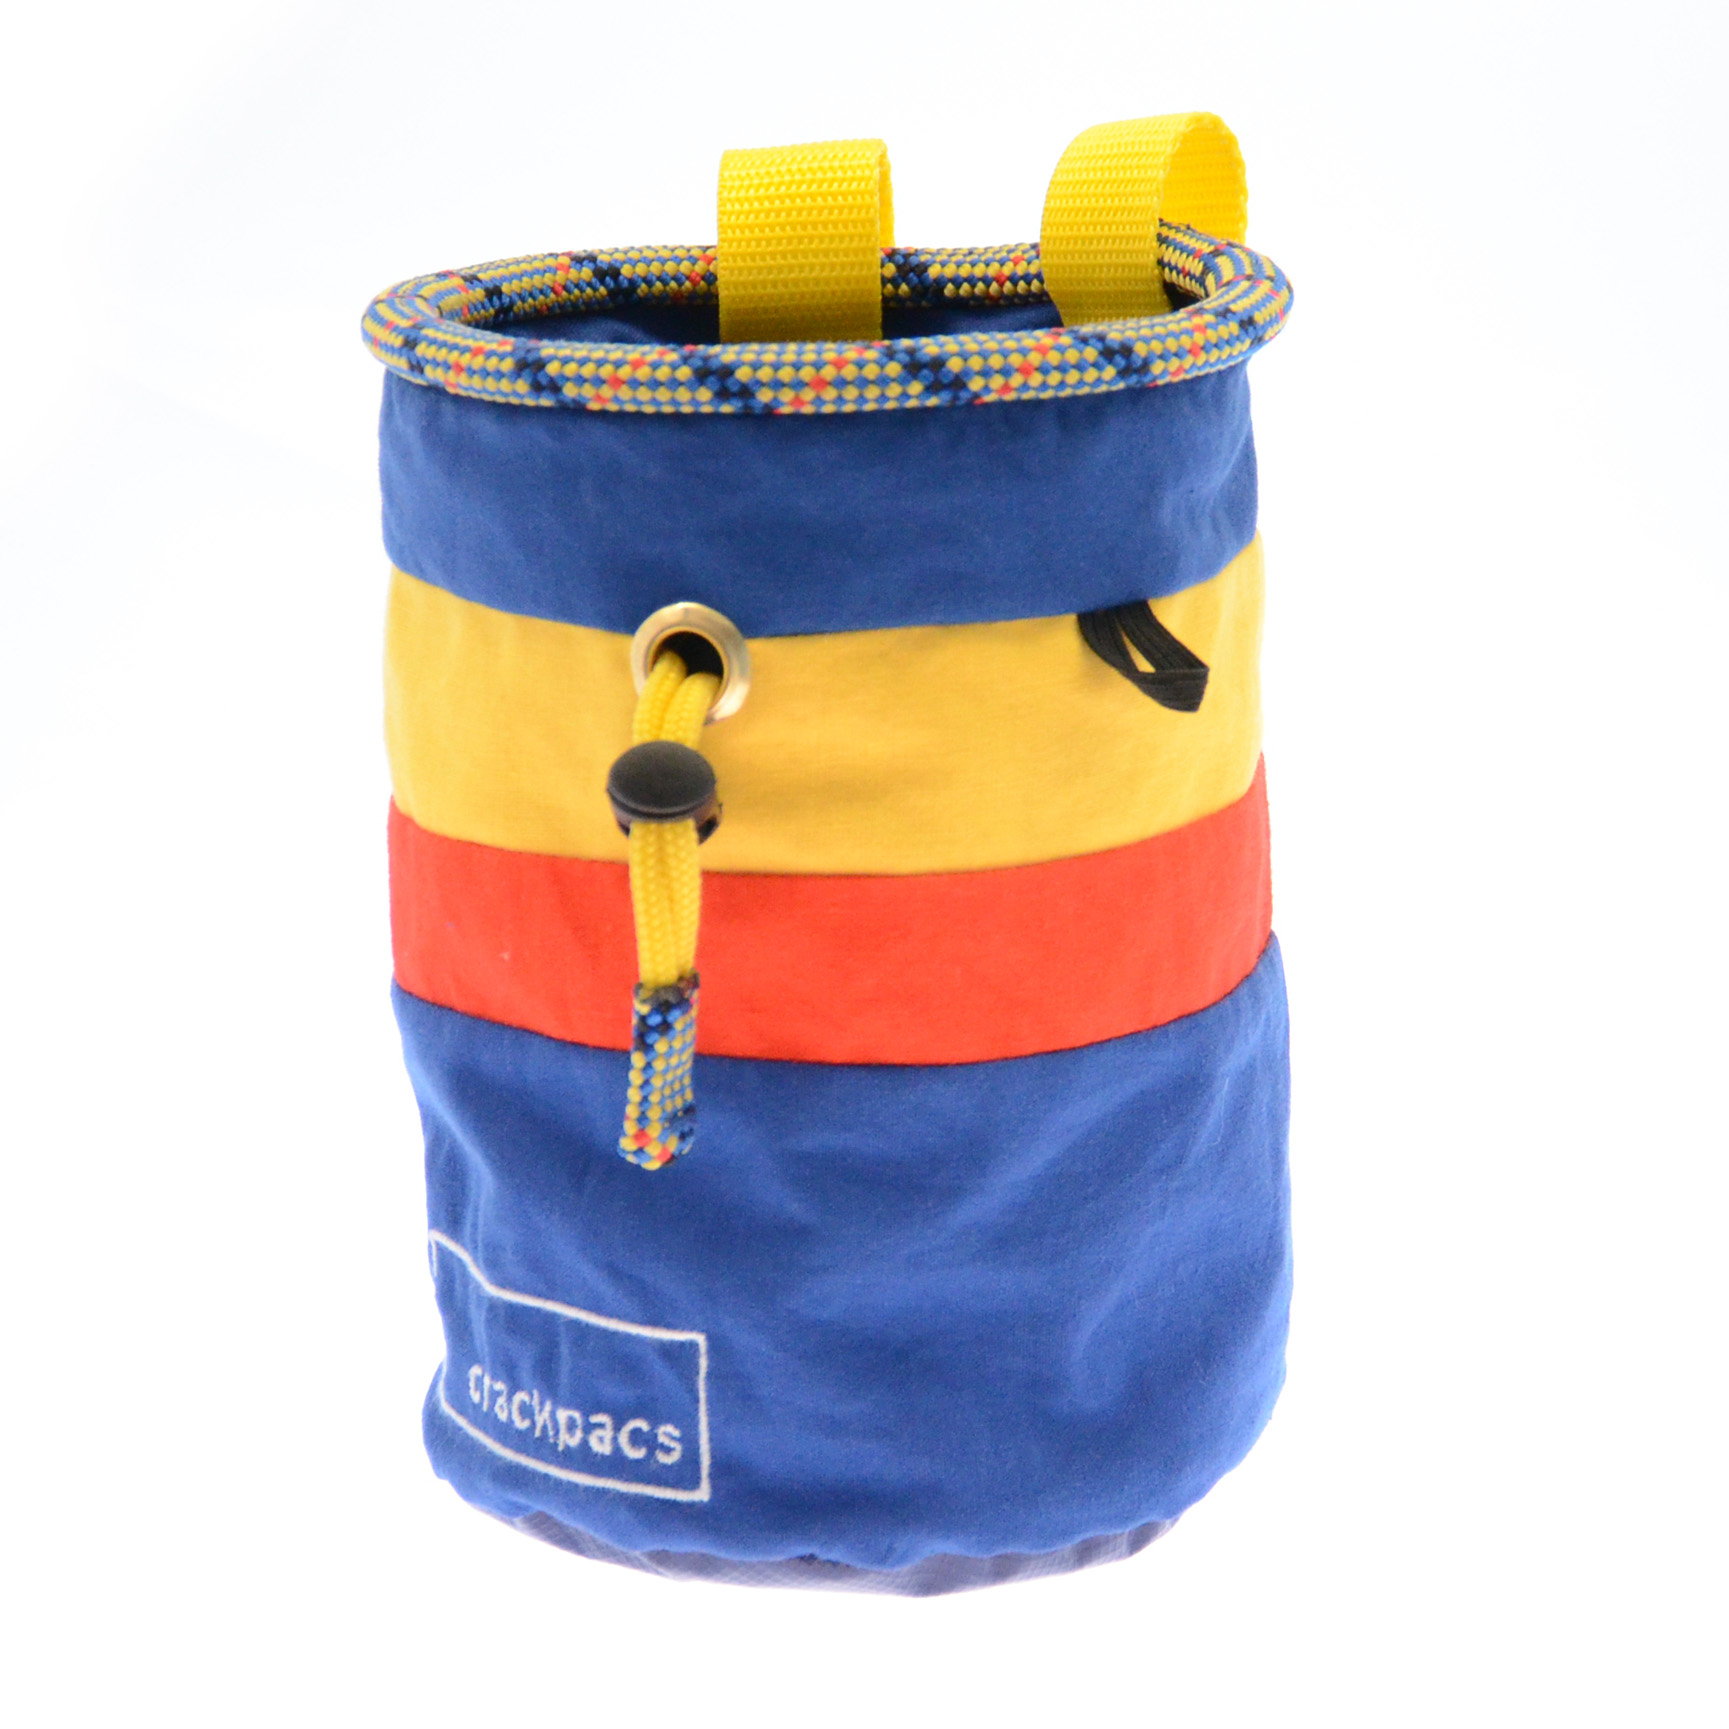 upcycled chalk bag made from old canvas tents and climbing rope - Crackpacs